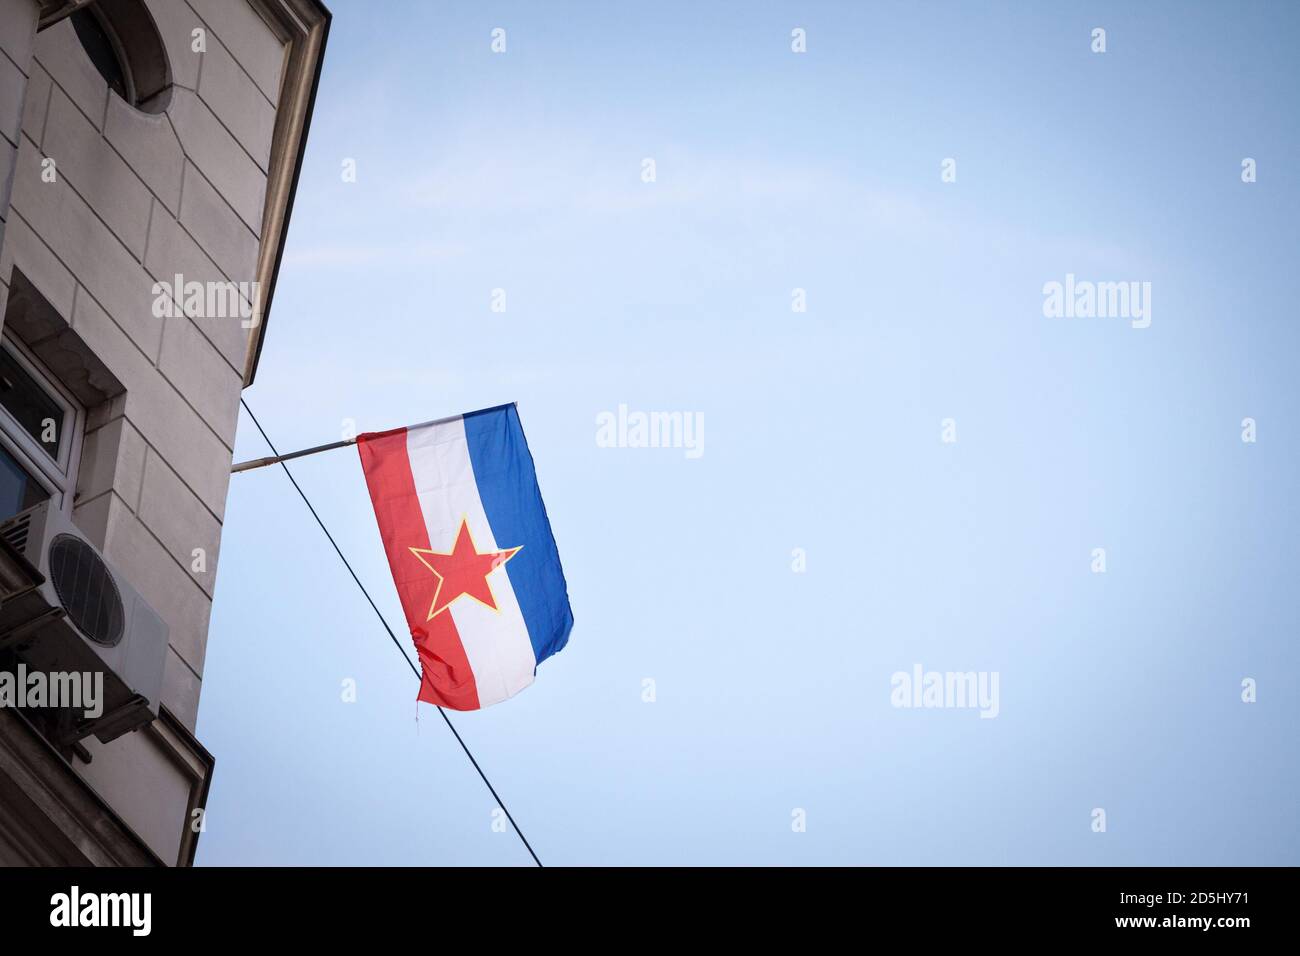 Yugoslav flag, with the red star of the communist socialist federal republic of yugoslavia (SFRY), waving in Belgrade, the former capital city of this Stock Photo